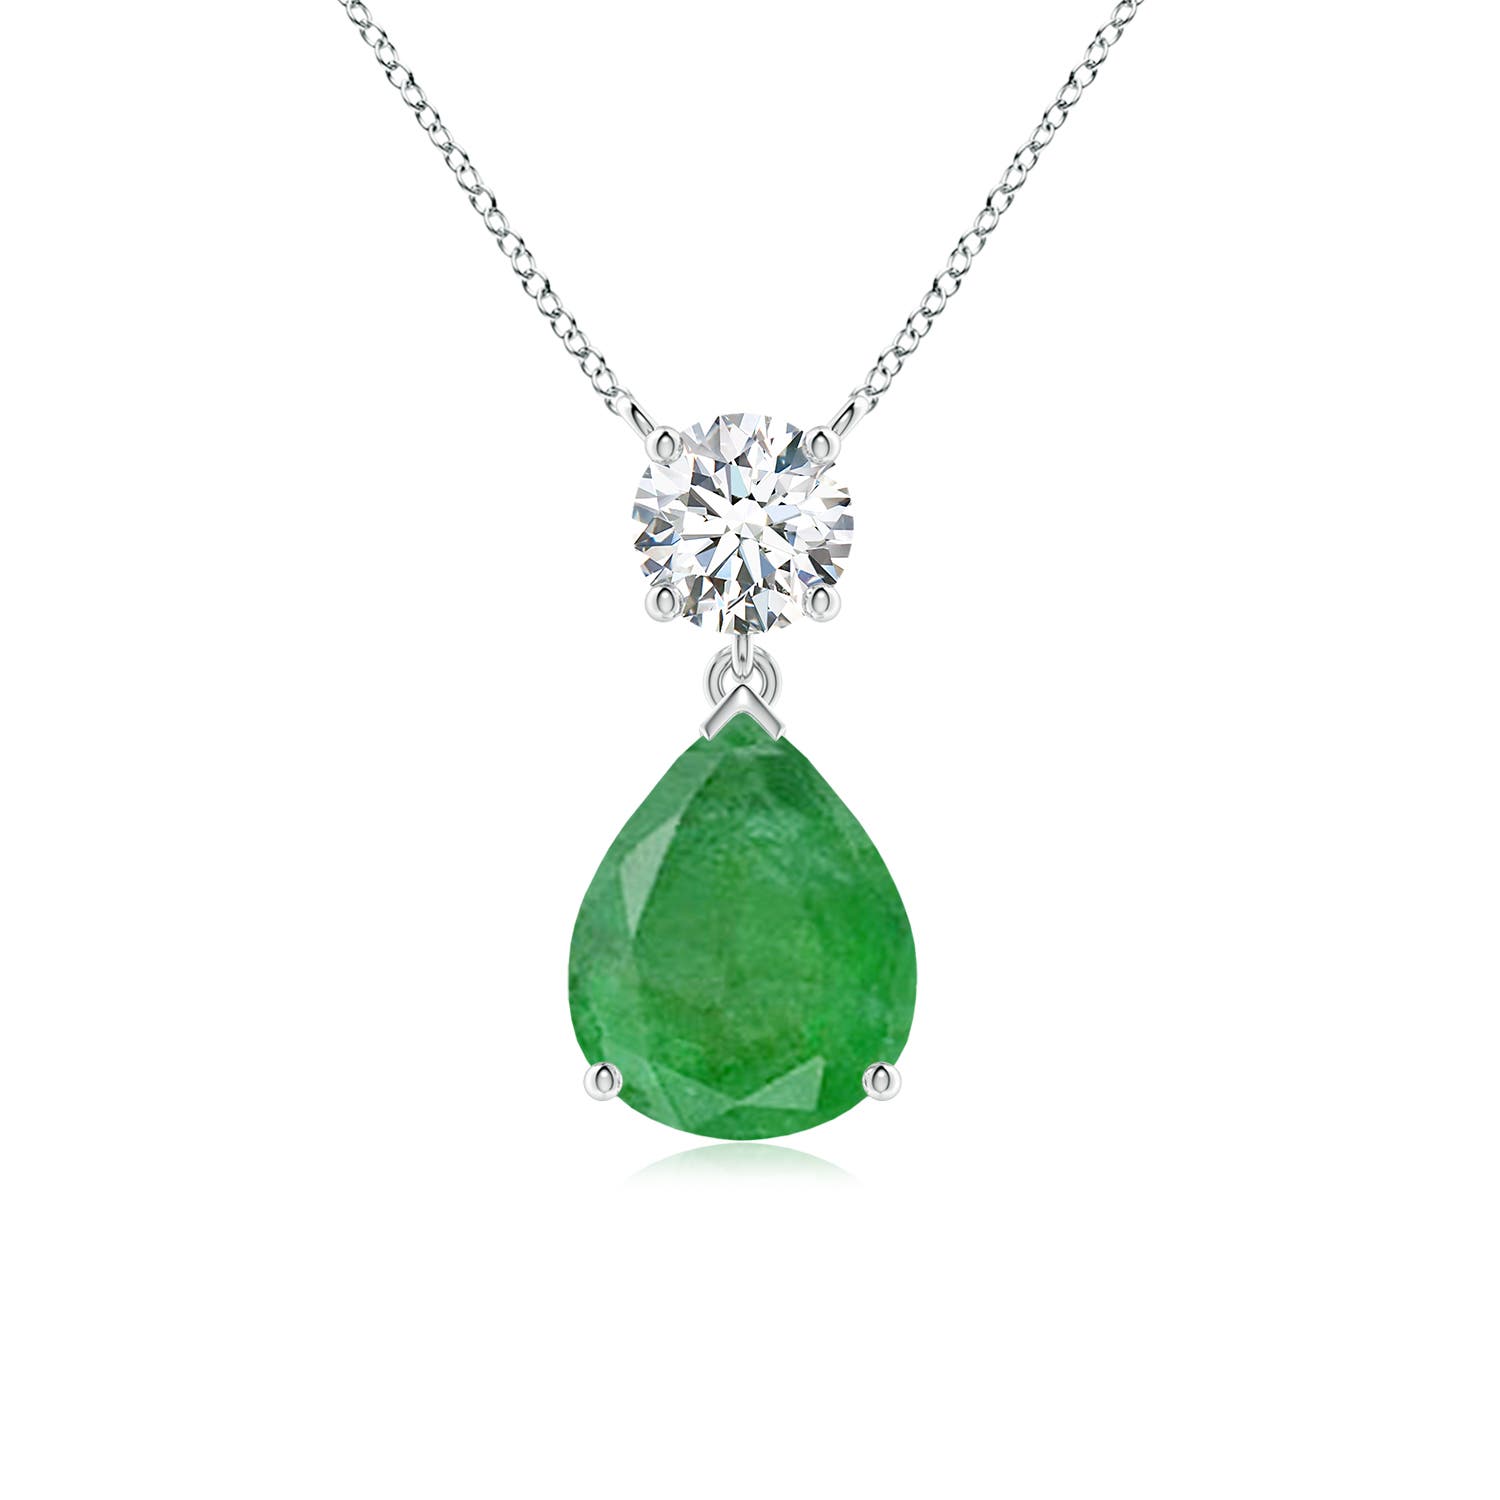 A - Emerald / 3 CT / 18 KT White Gold